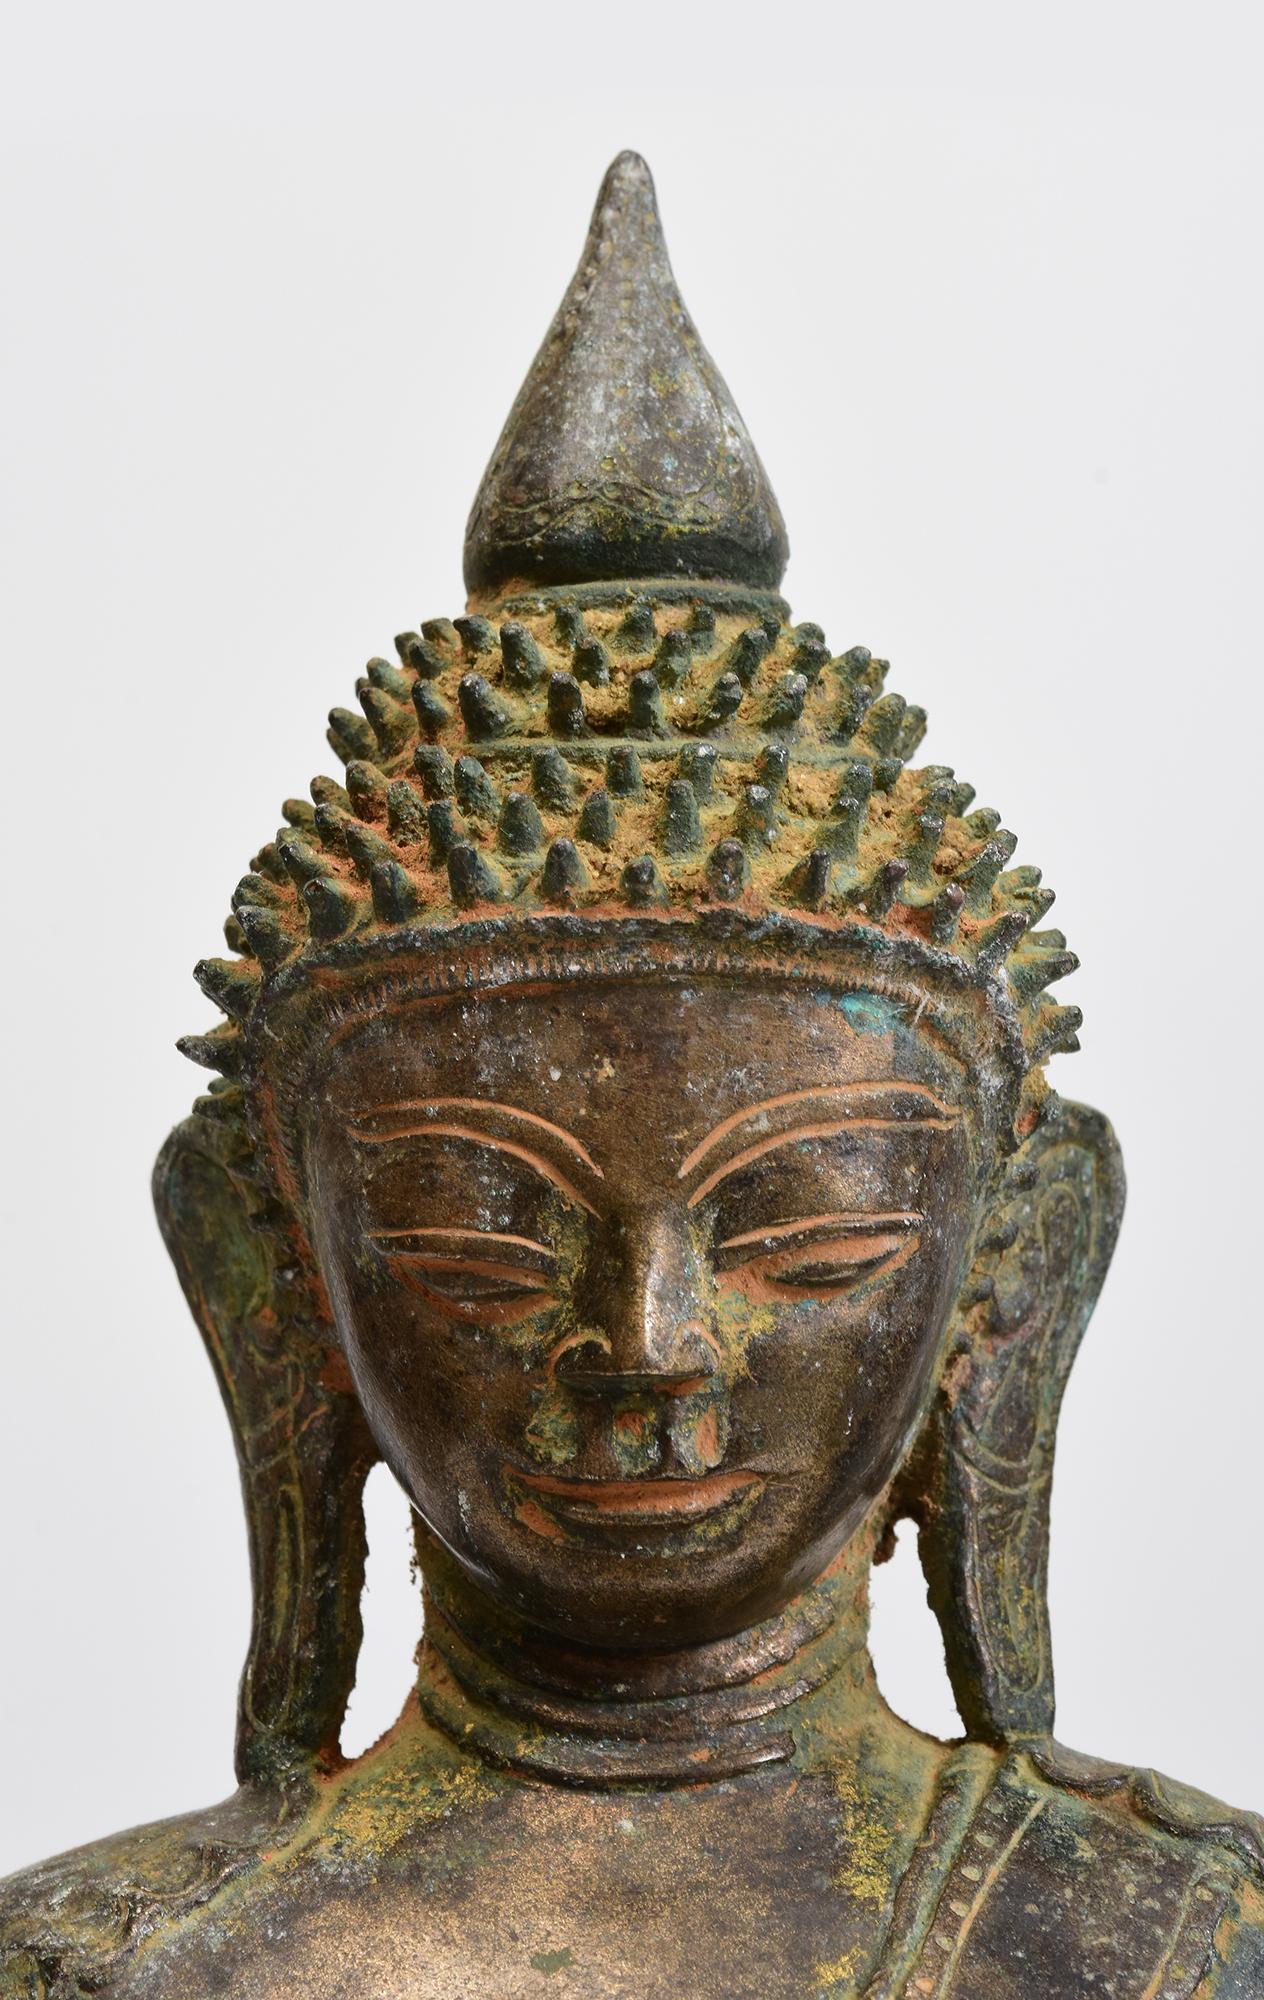 Rare Antique Burmese bronze Buddha sitting in Mara Vijaya (calling the earth to witness) posture on a base.

This Buddha has Indian influence in facial expression.

Age: Burma, Early Shan Period, 17th Century
Size: Height 37.2 C.M. / Width 24 C.M. /